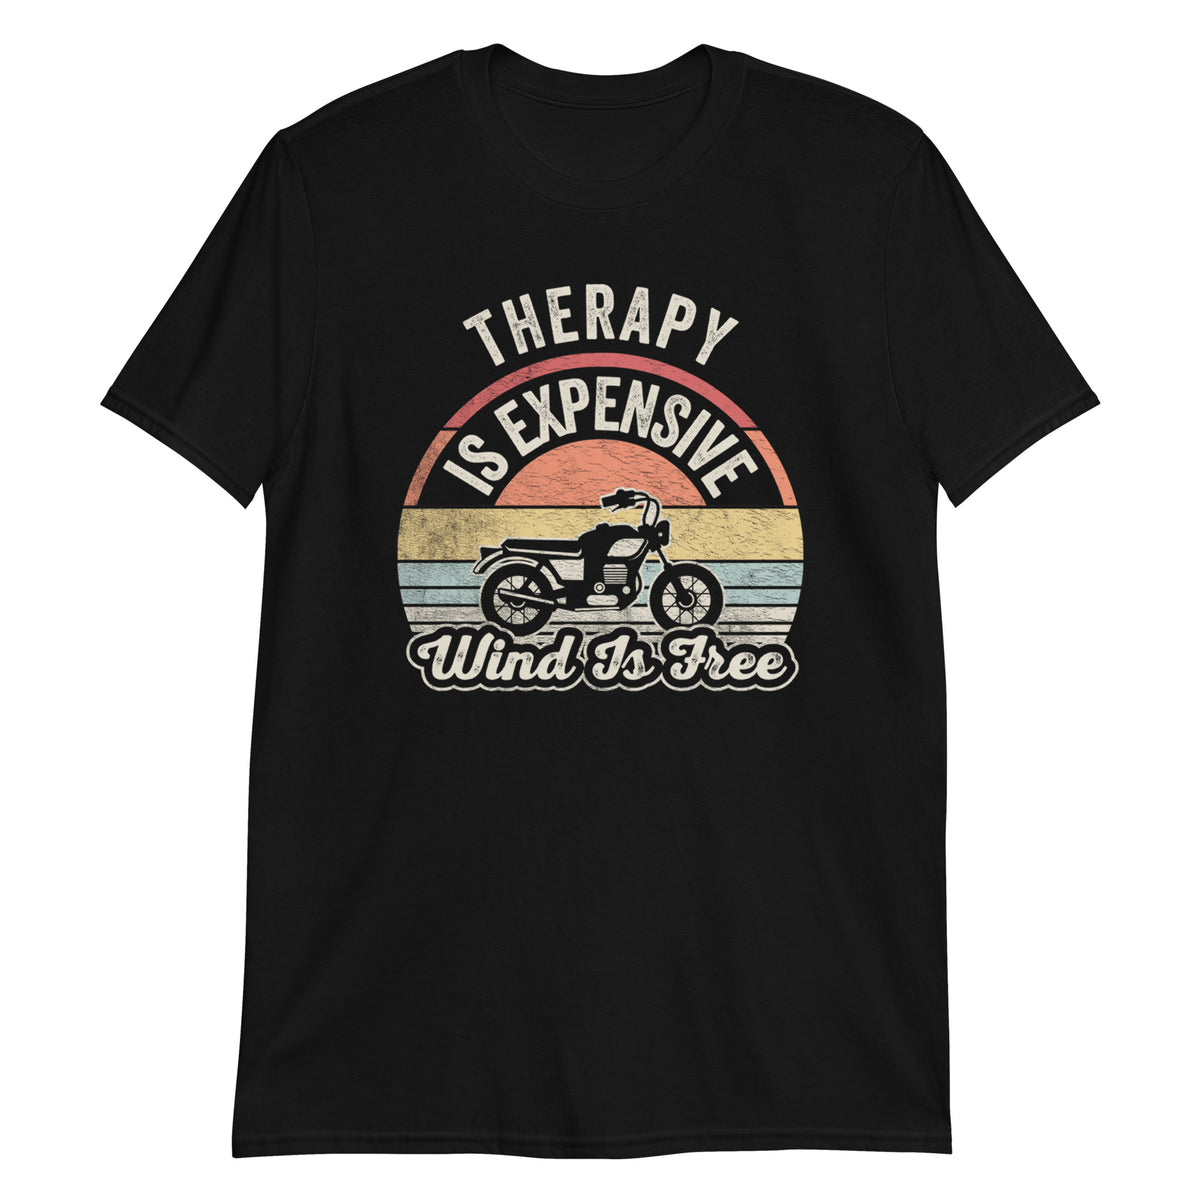 Therapy is Expensive Wind is Free T-Shirt